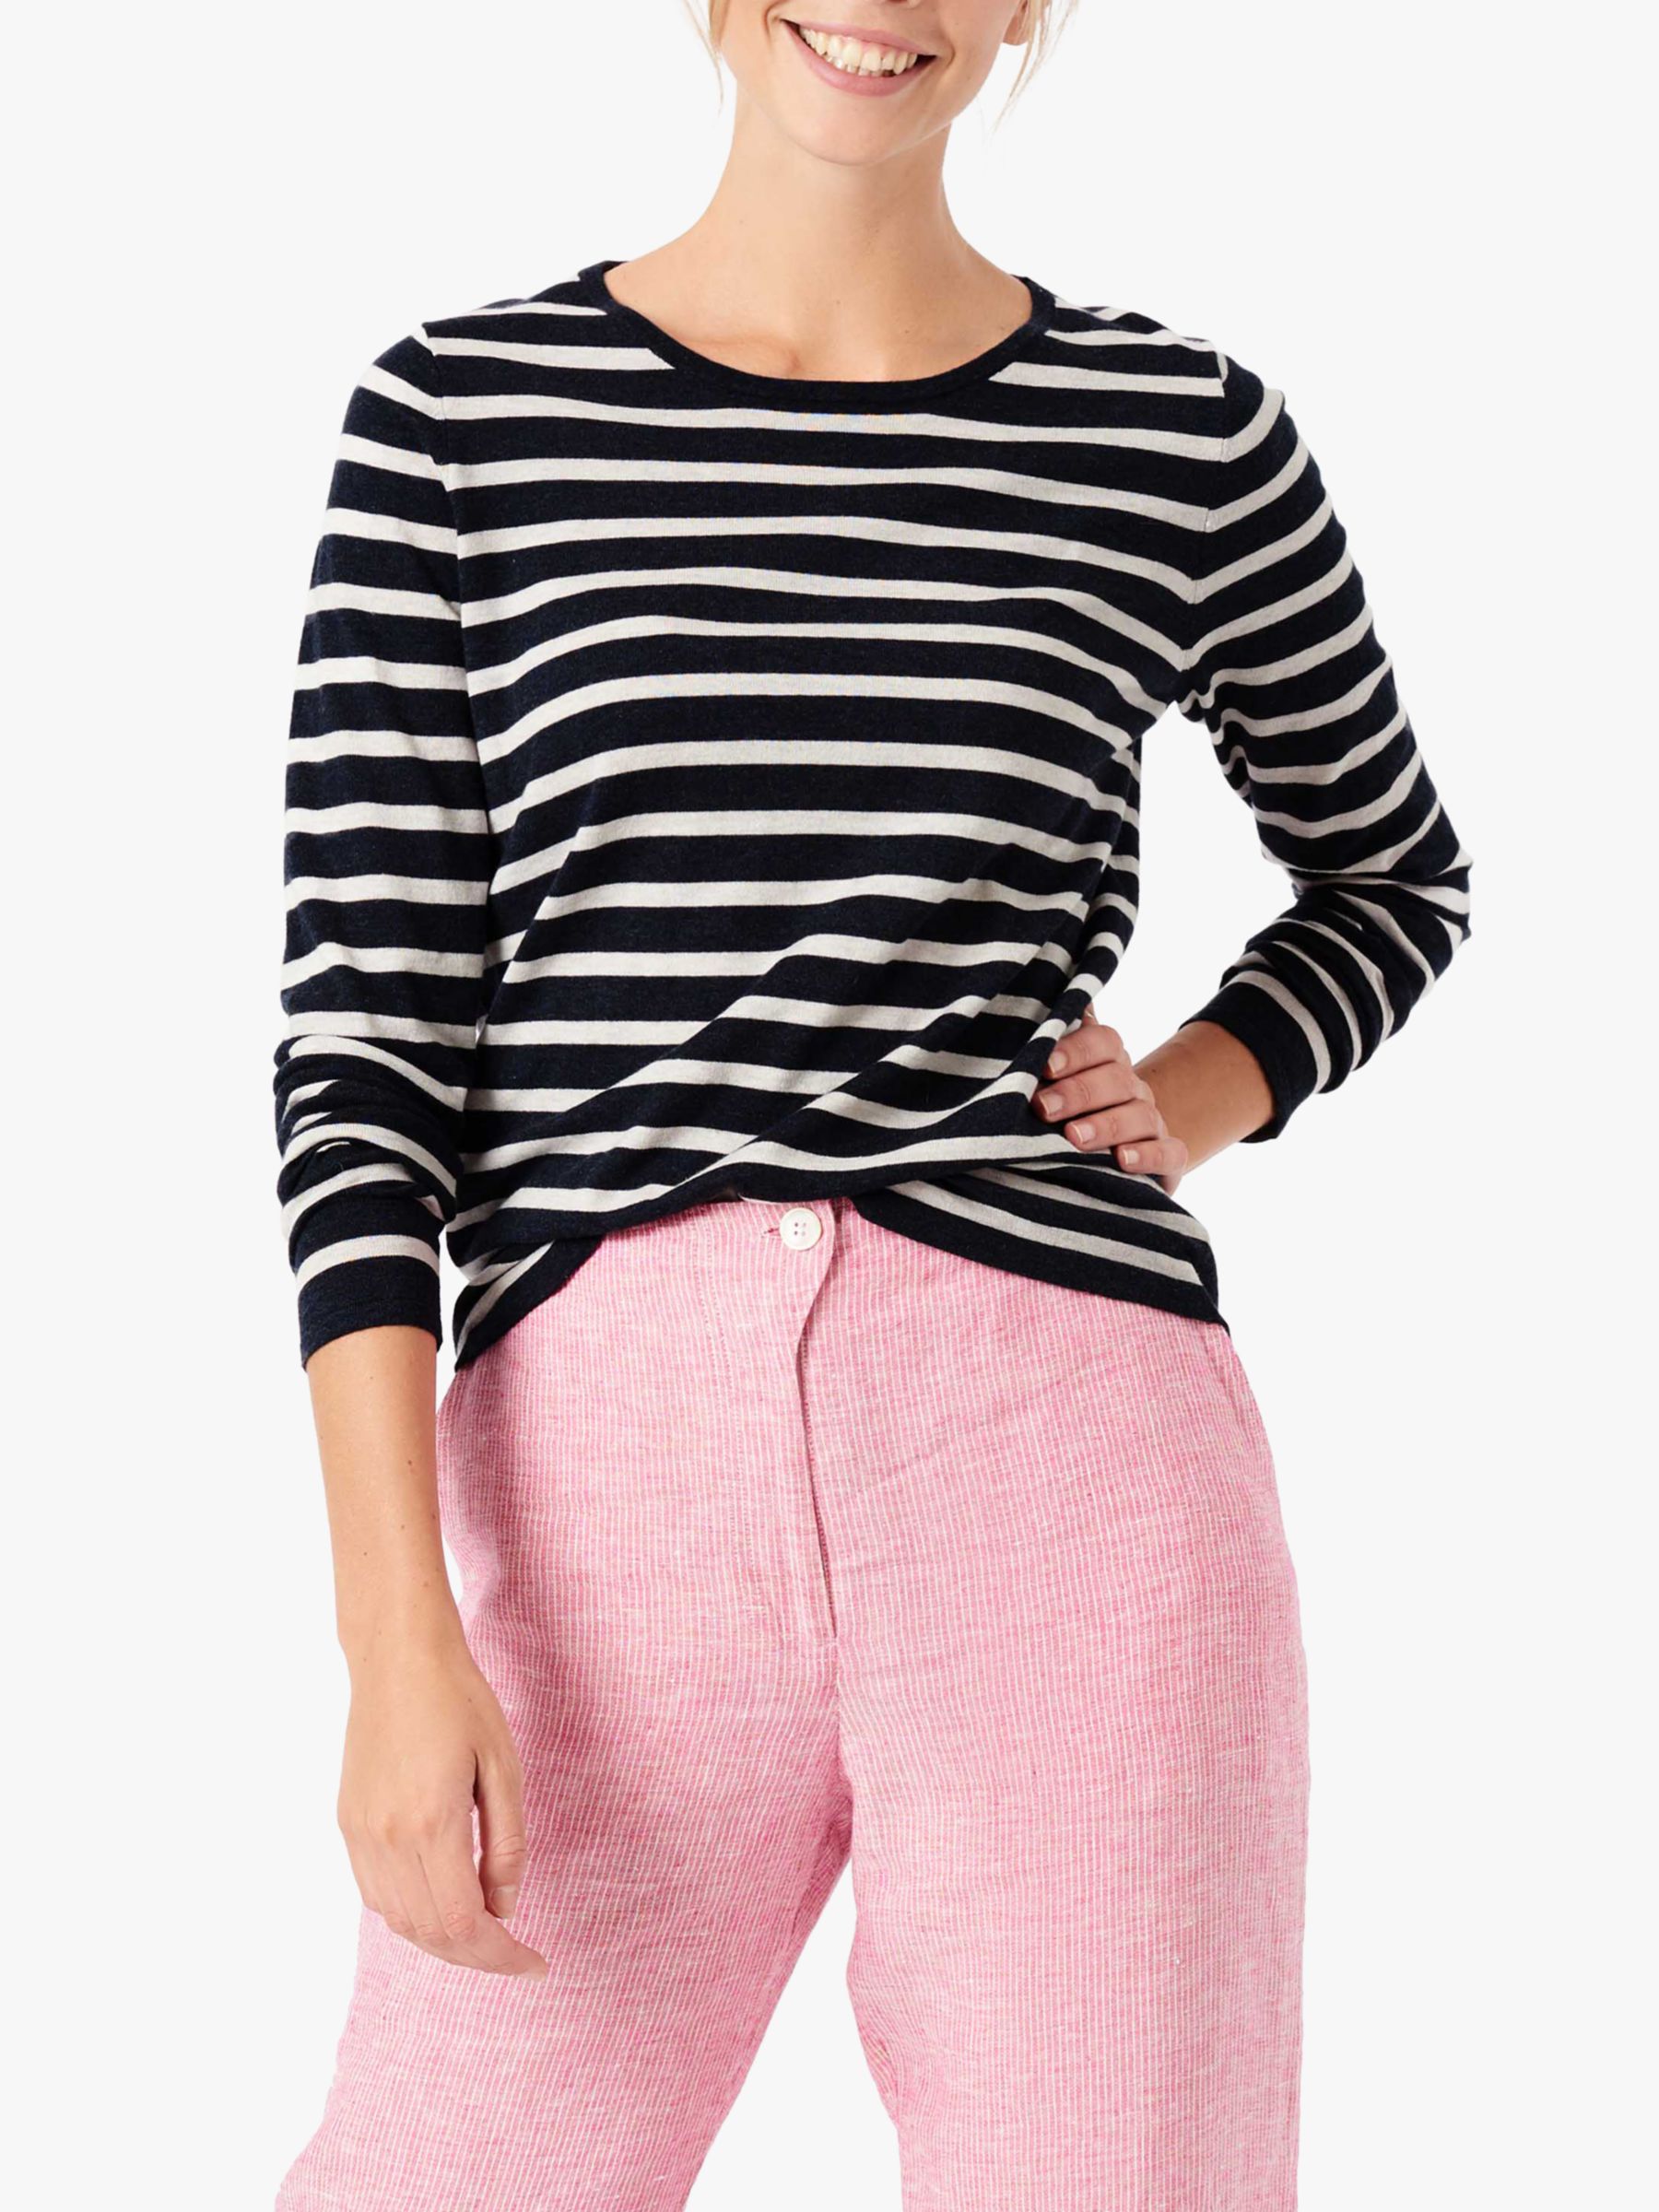 Brora Cotton Striped Long Sleeved Tee